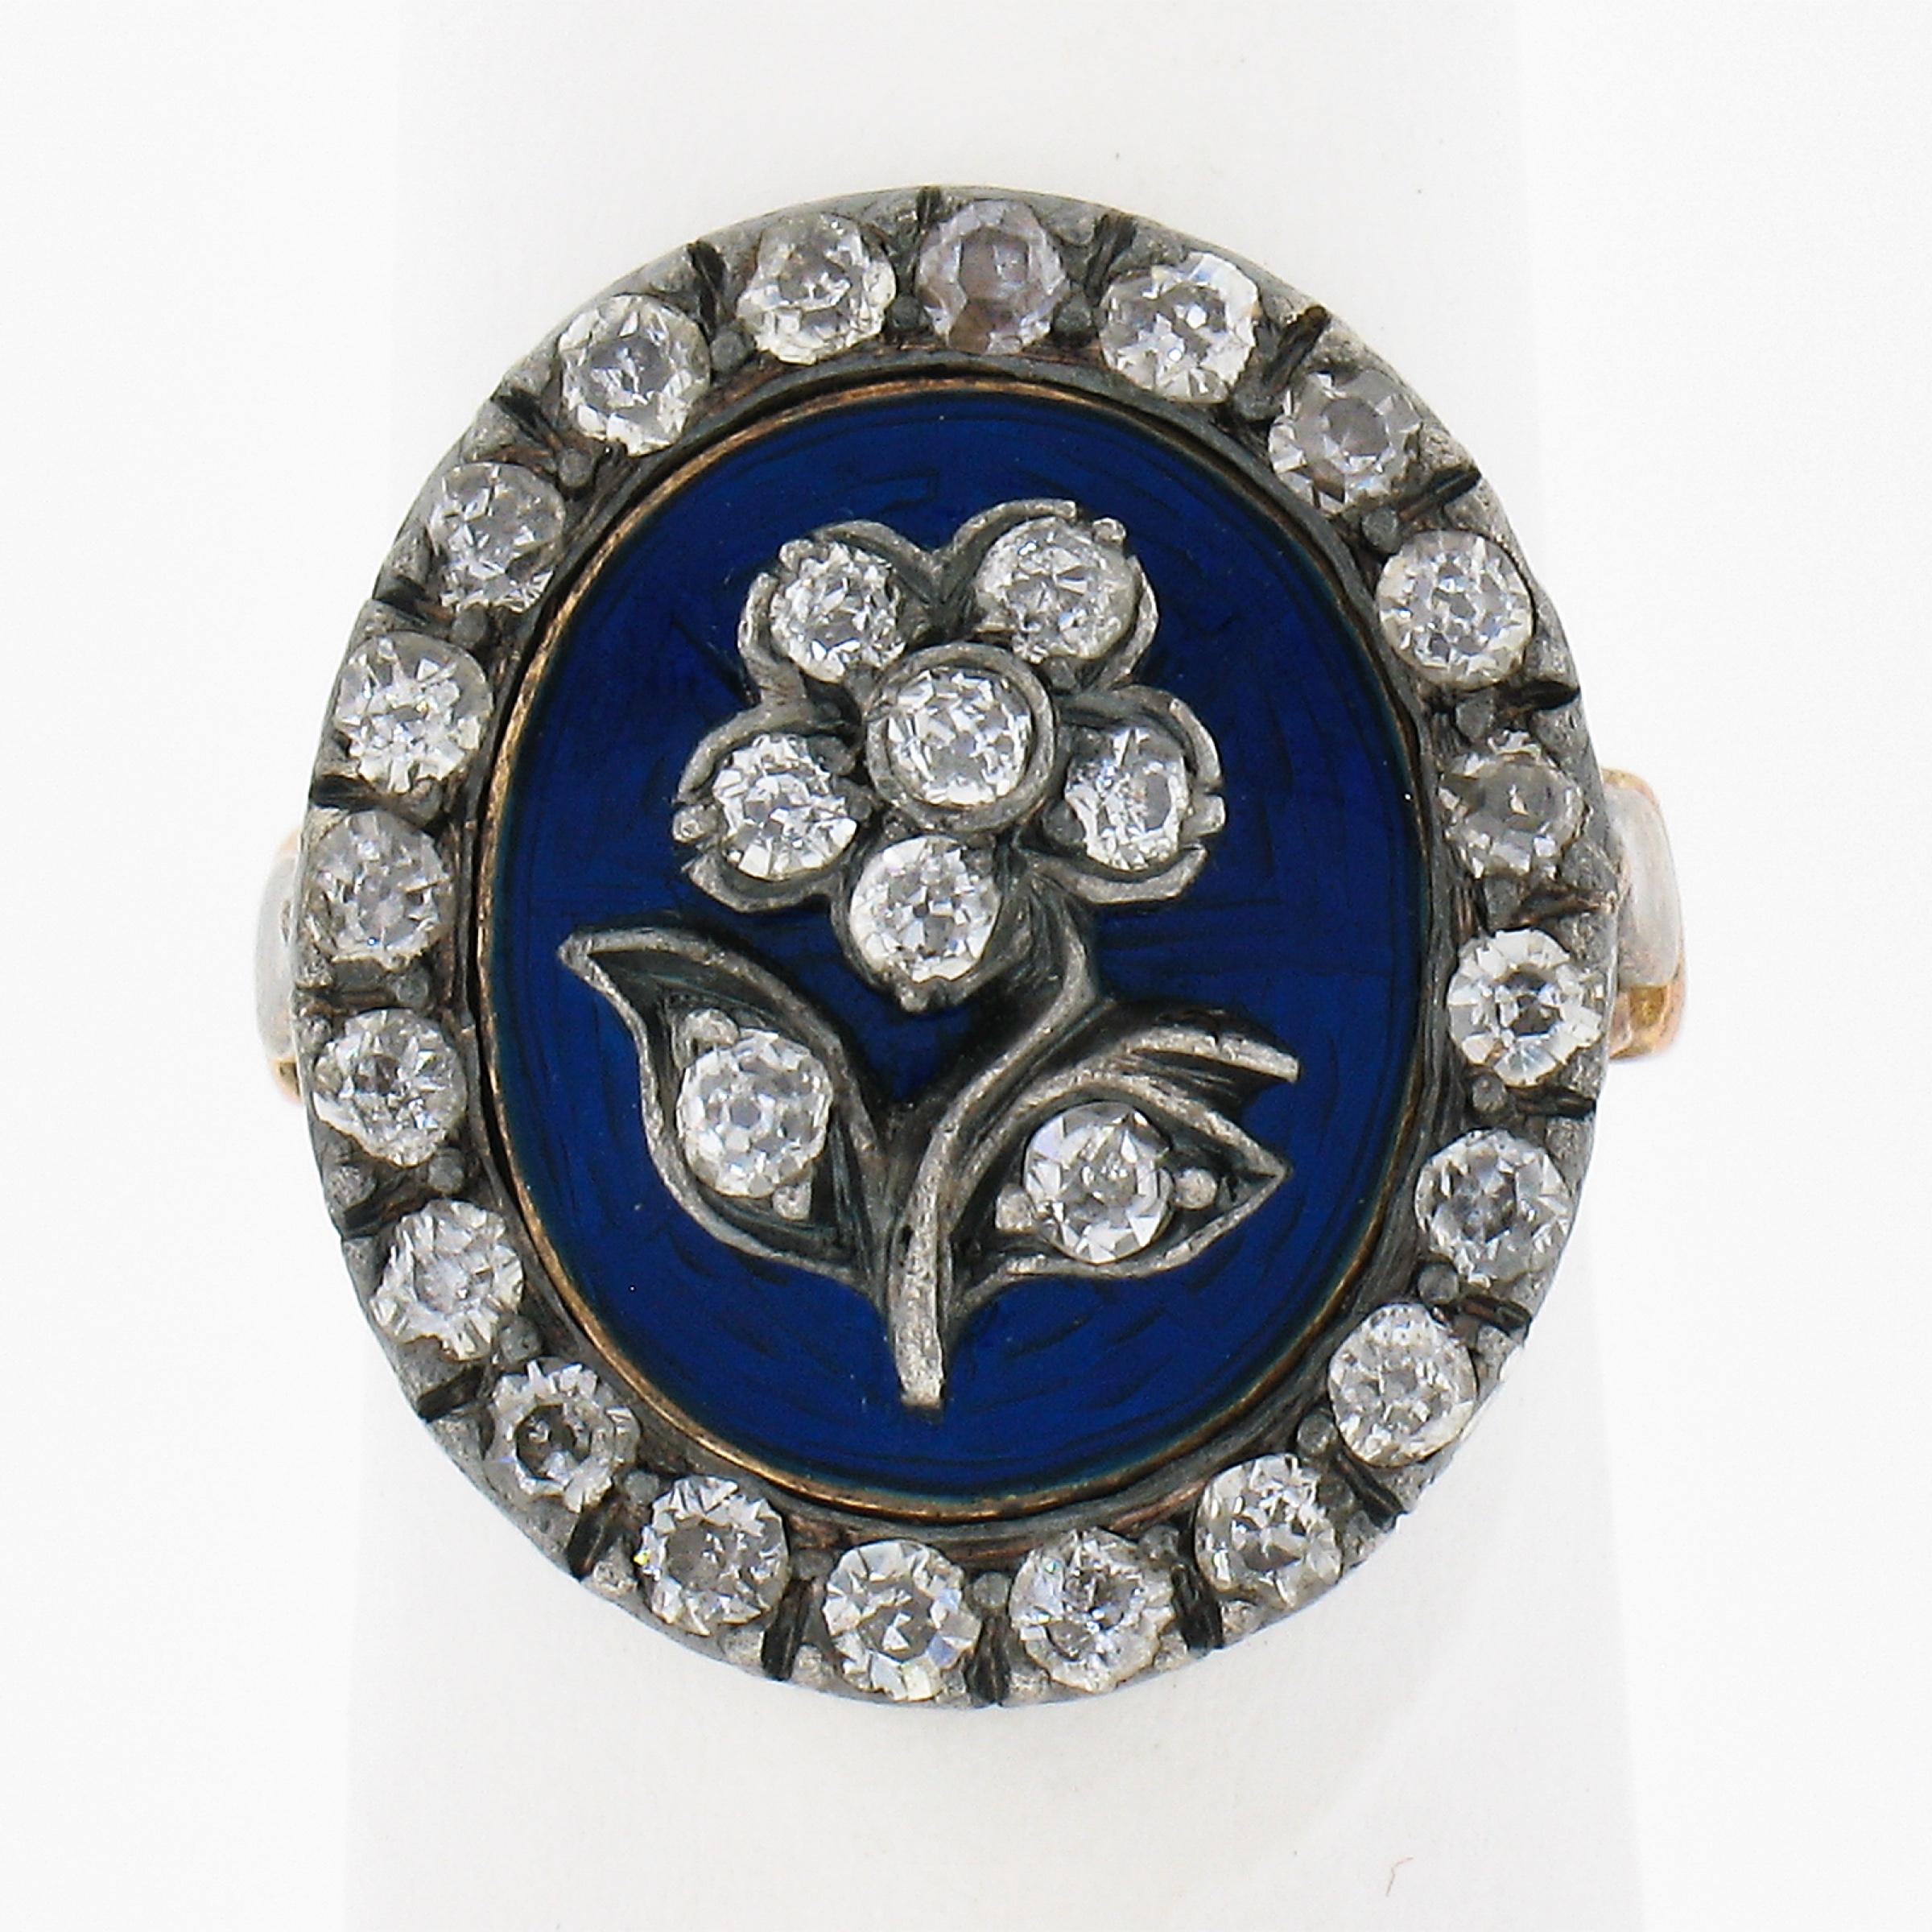 This gorgeous antique diamond ring is crafted during the late Georgian era in solid rosy yellow gold with silver top and and features a beautiful diamond flower at the center of the oval design that is beautifully adorned with royal blue enamel